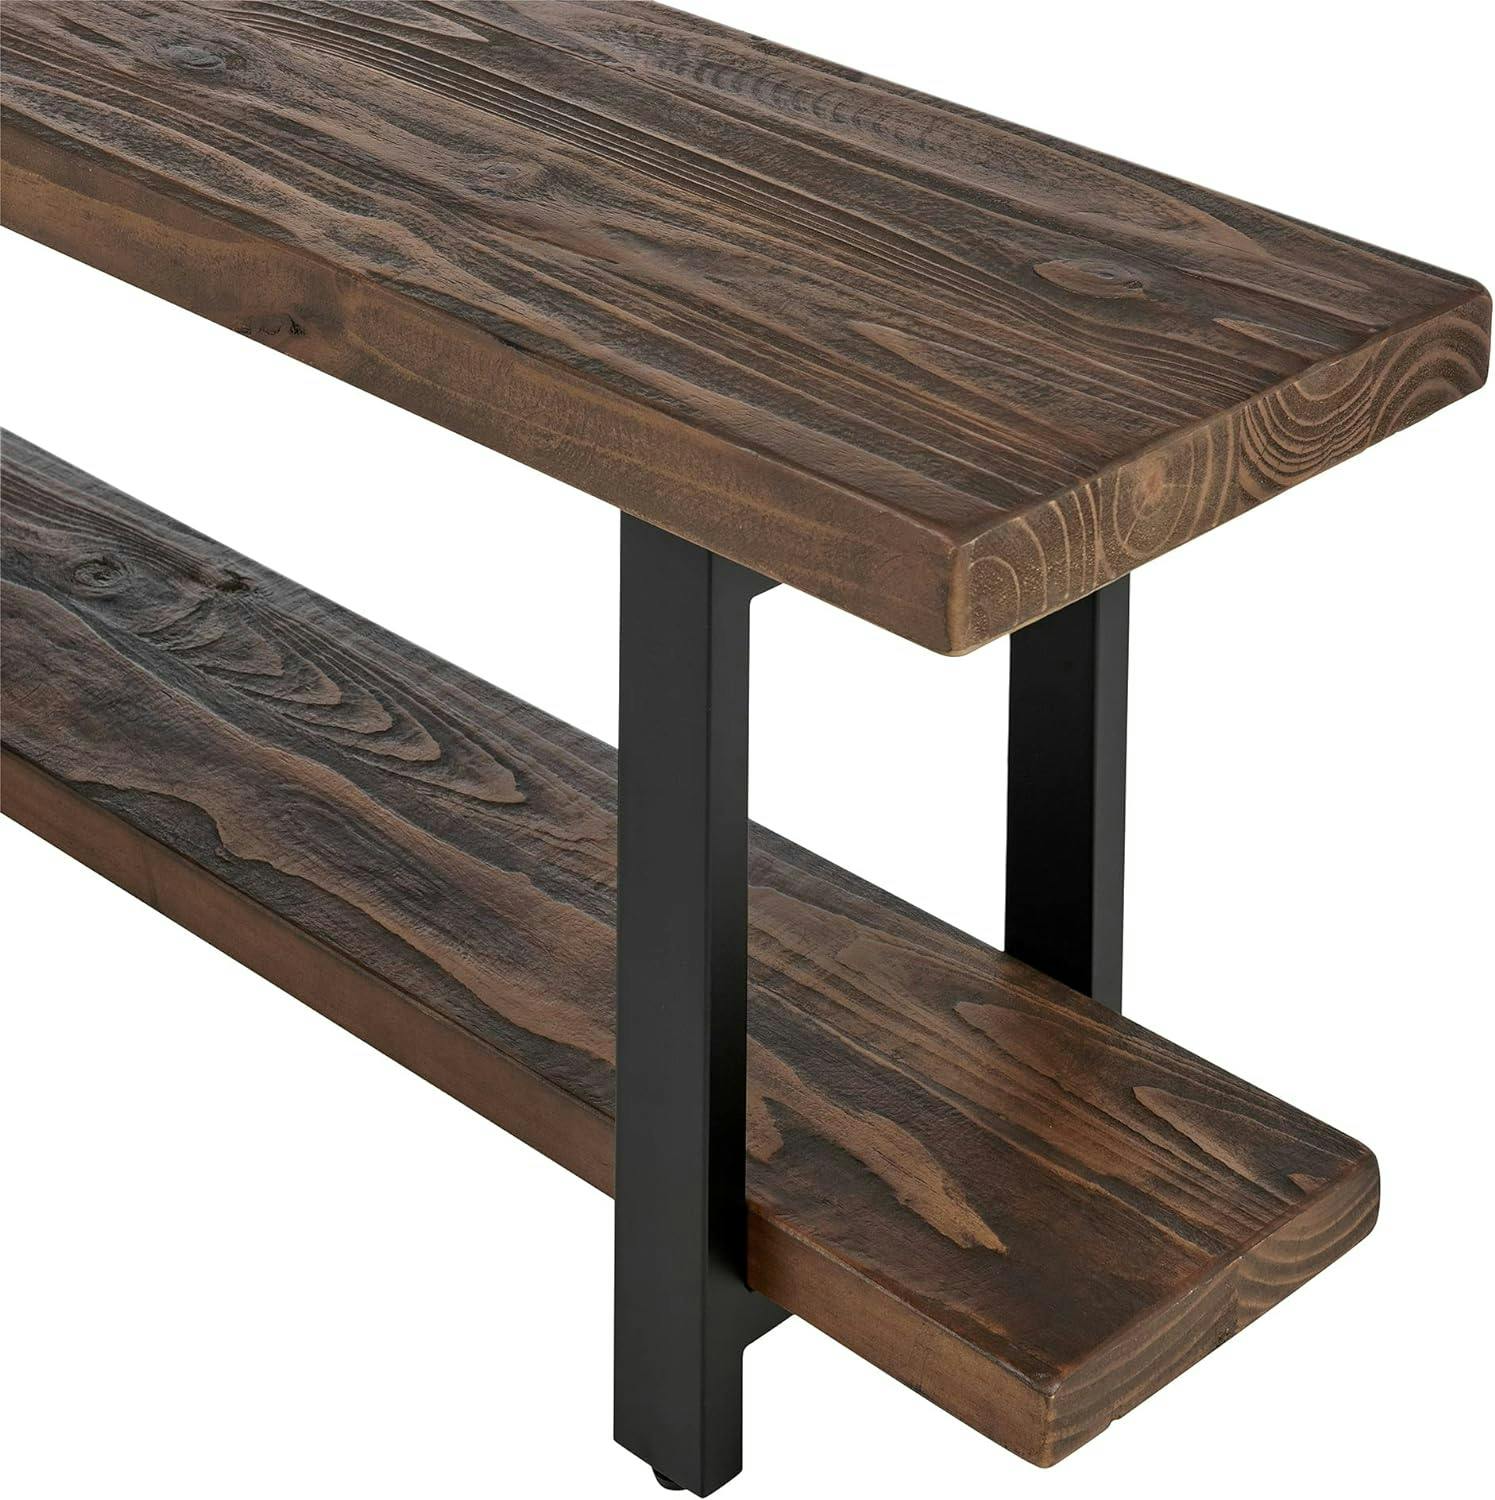 Pomona Rustic Industrial Solid Pine and Metal Bench with Storage